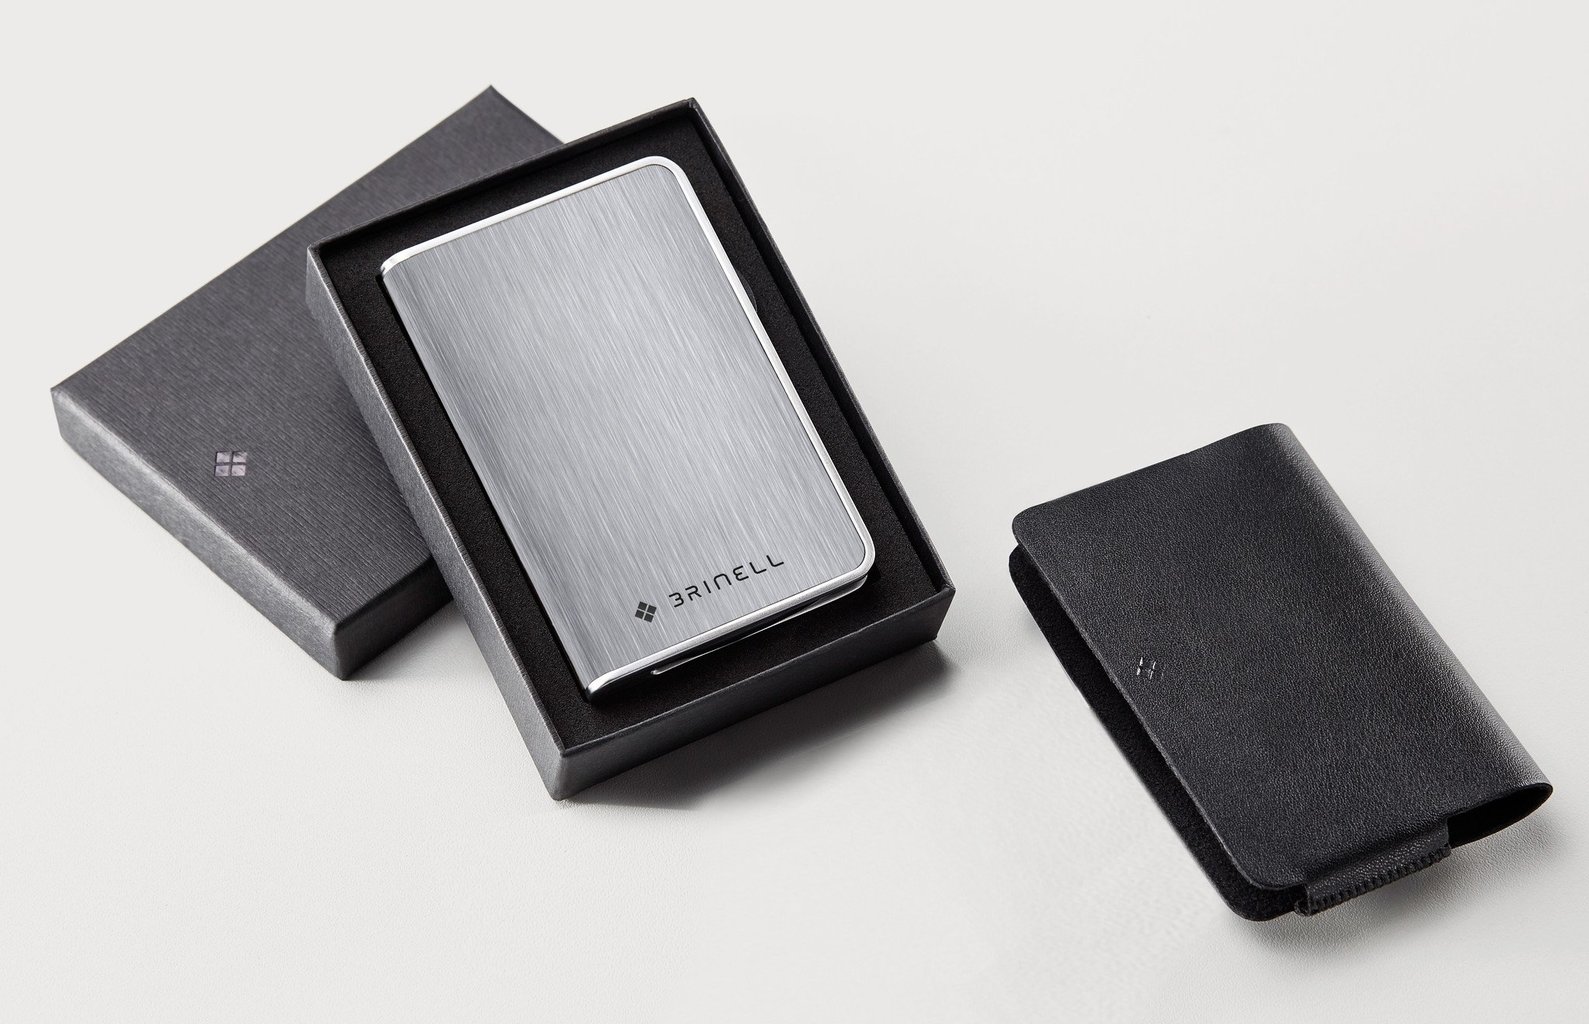 Brinell Drive SSD Review - Detailed Review « HDDMag